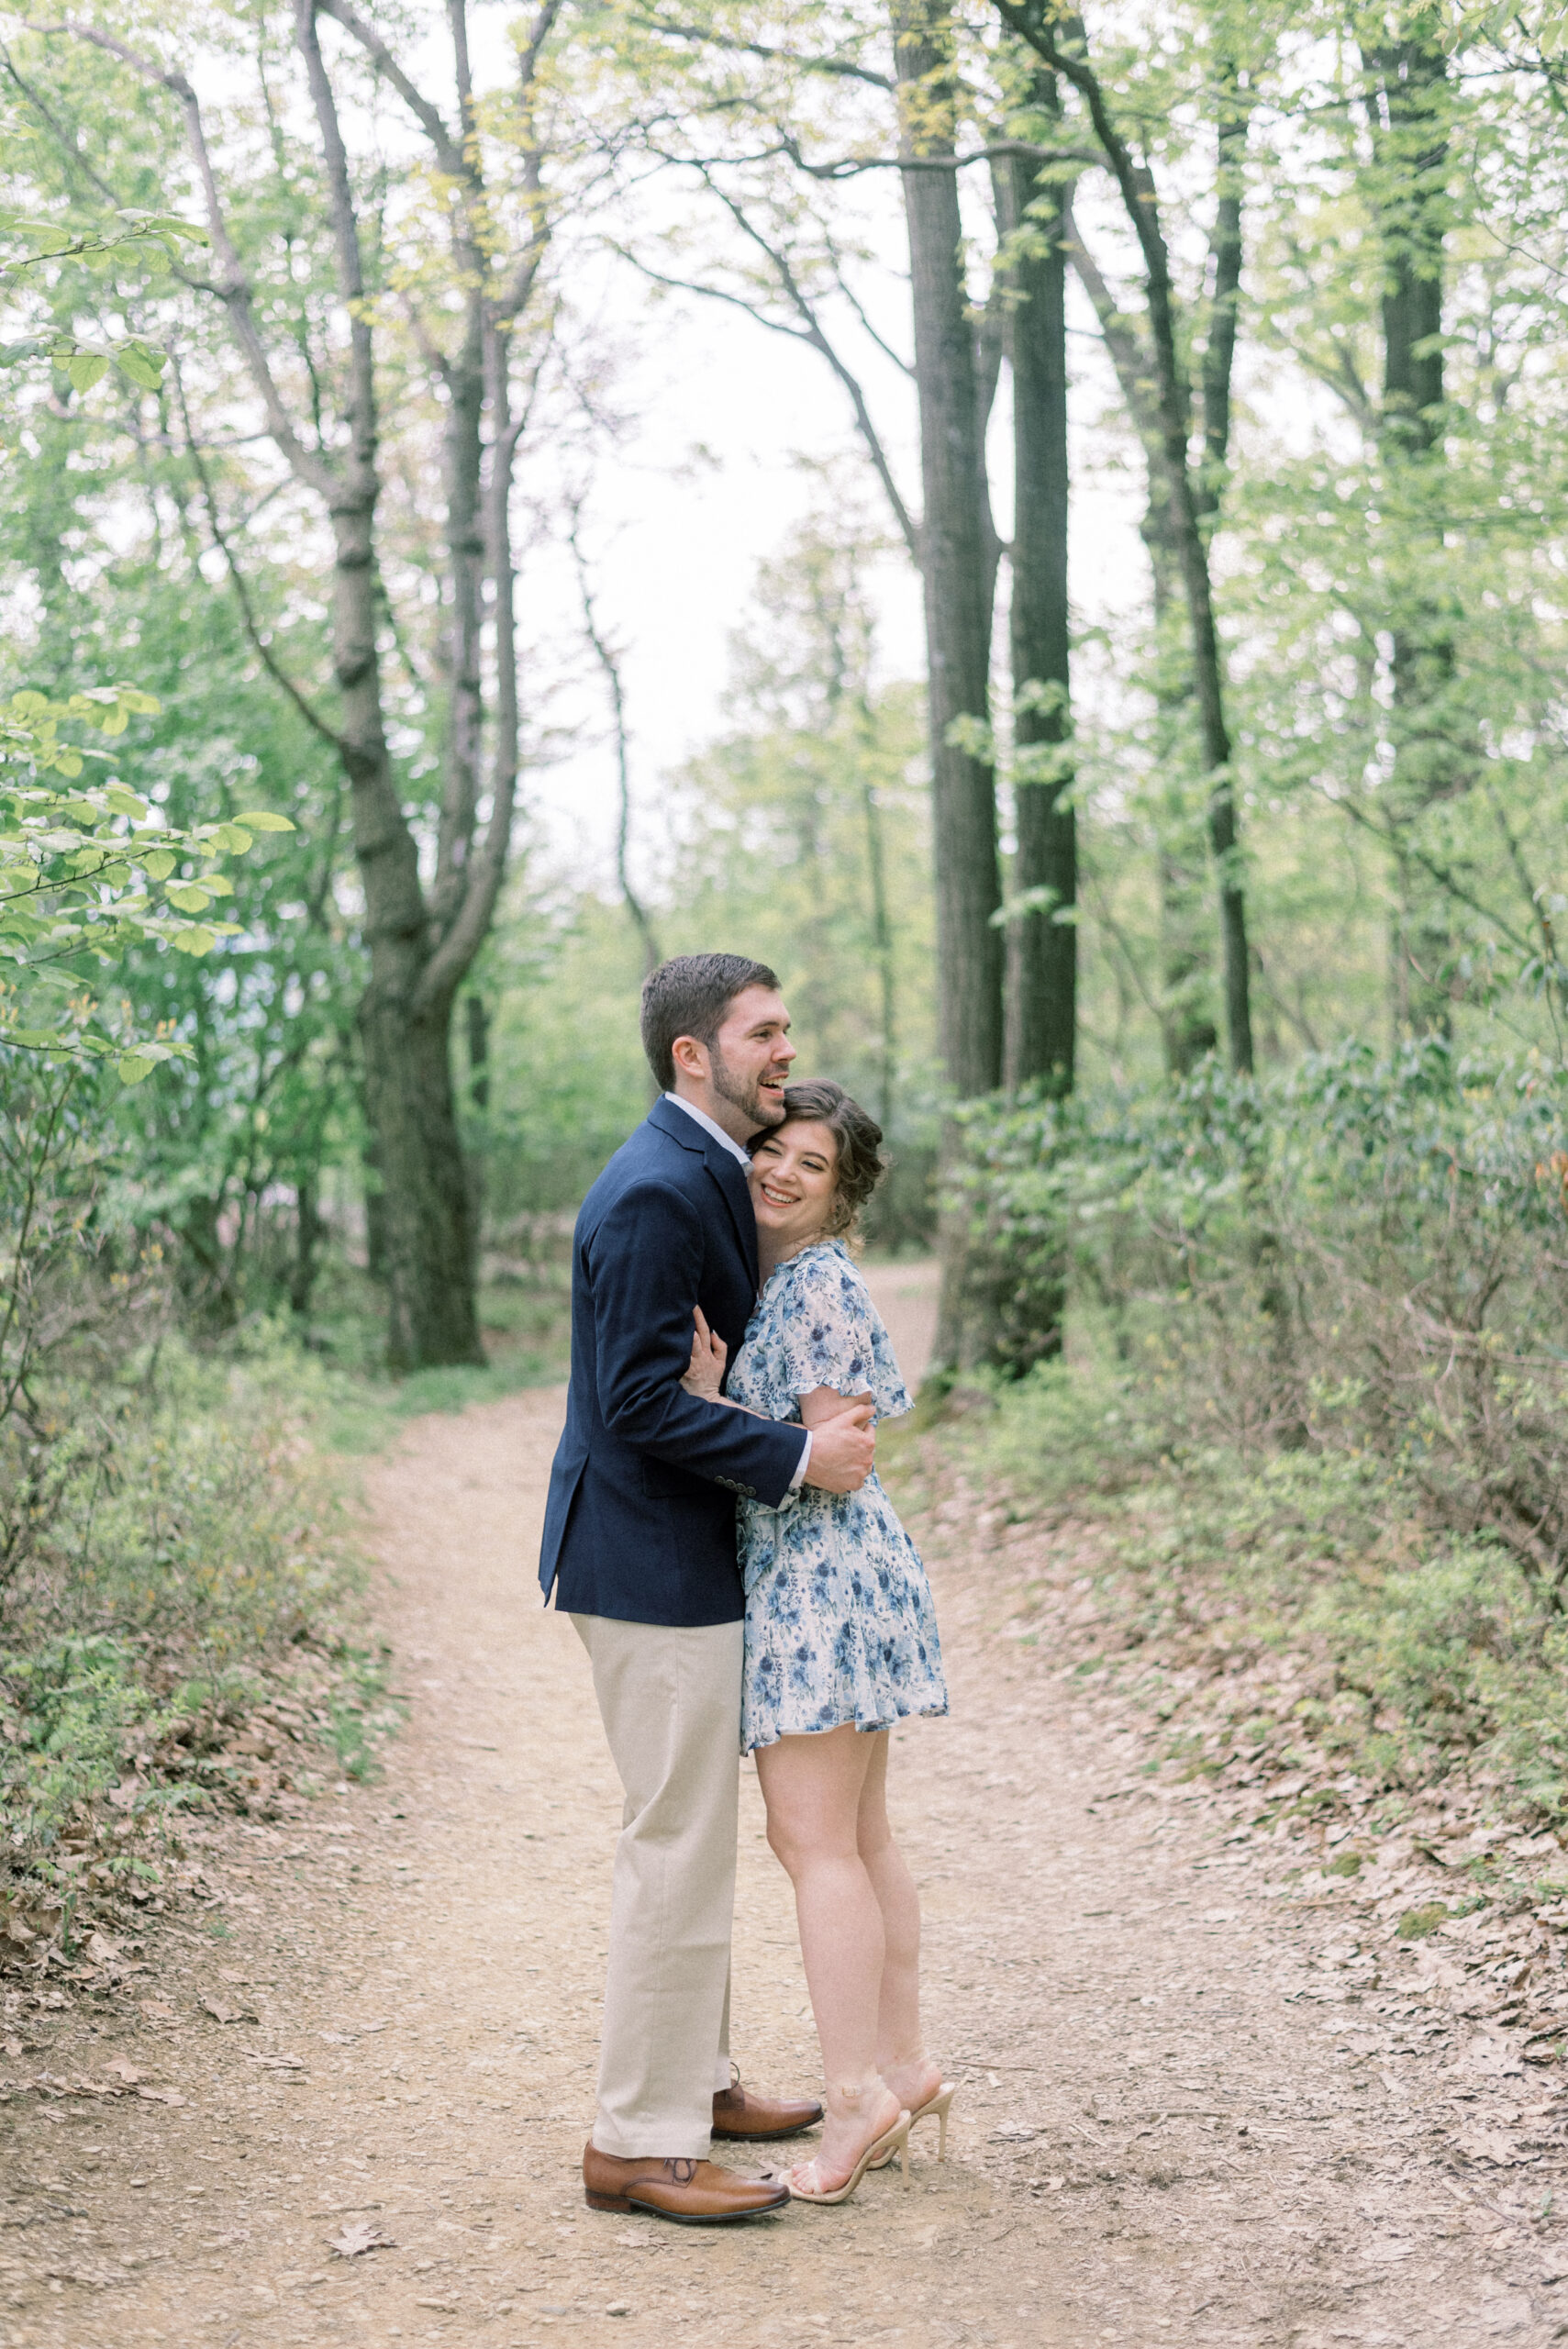 Maryland wedding photographer captures couple hugging in forest during engagement portraits